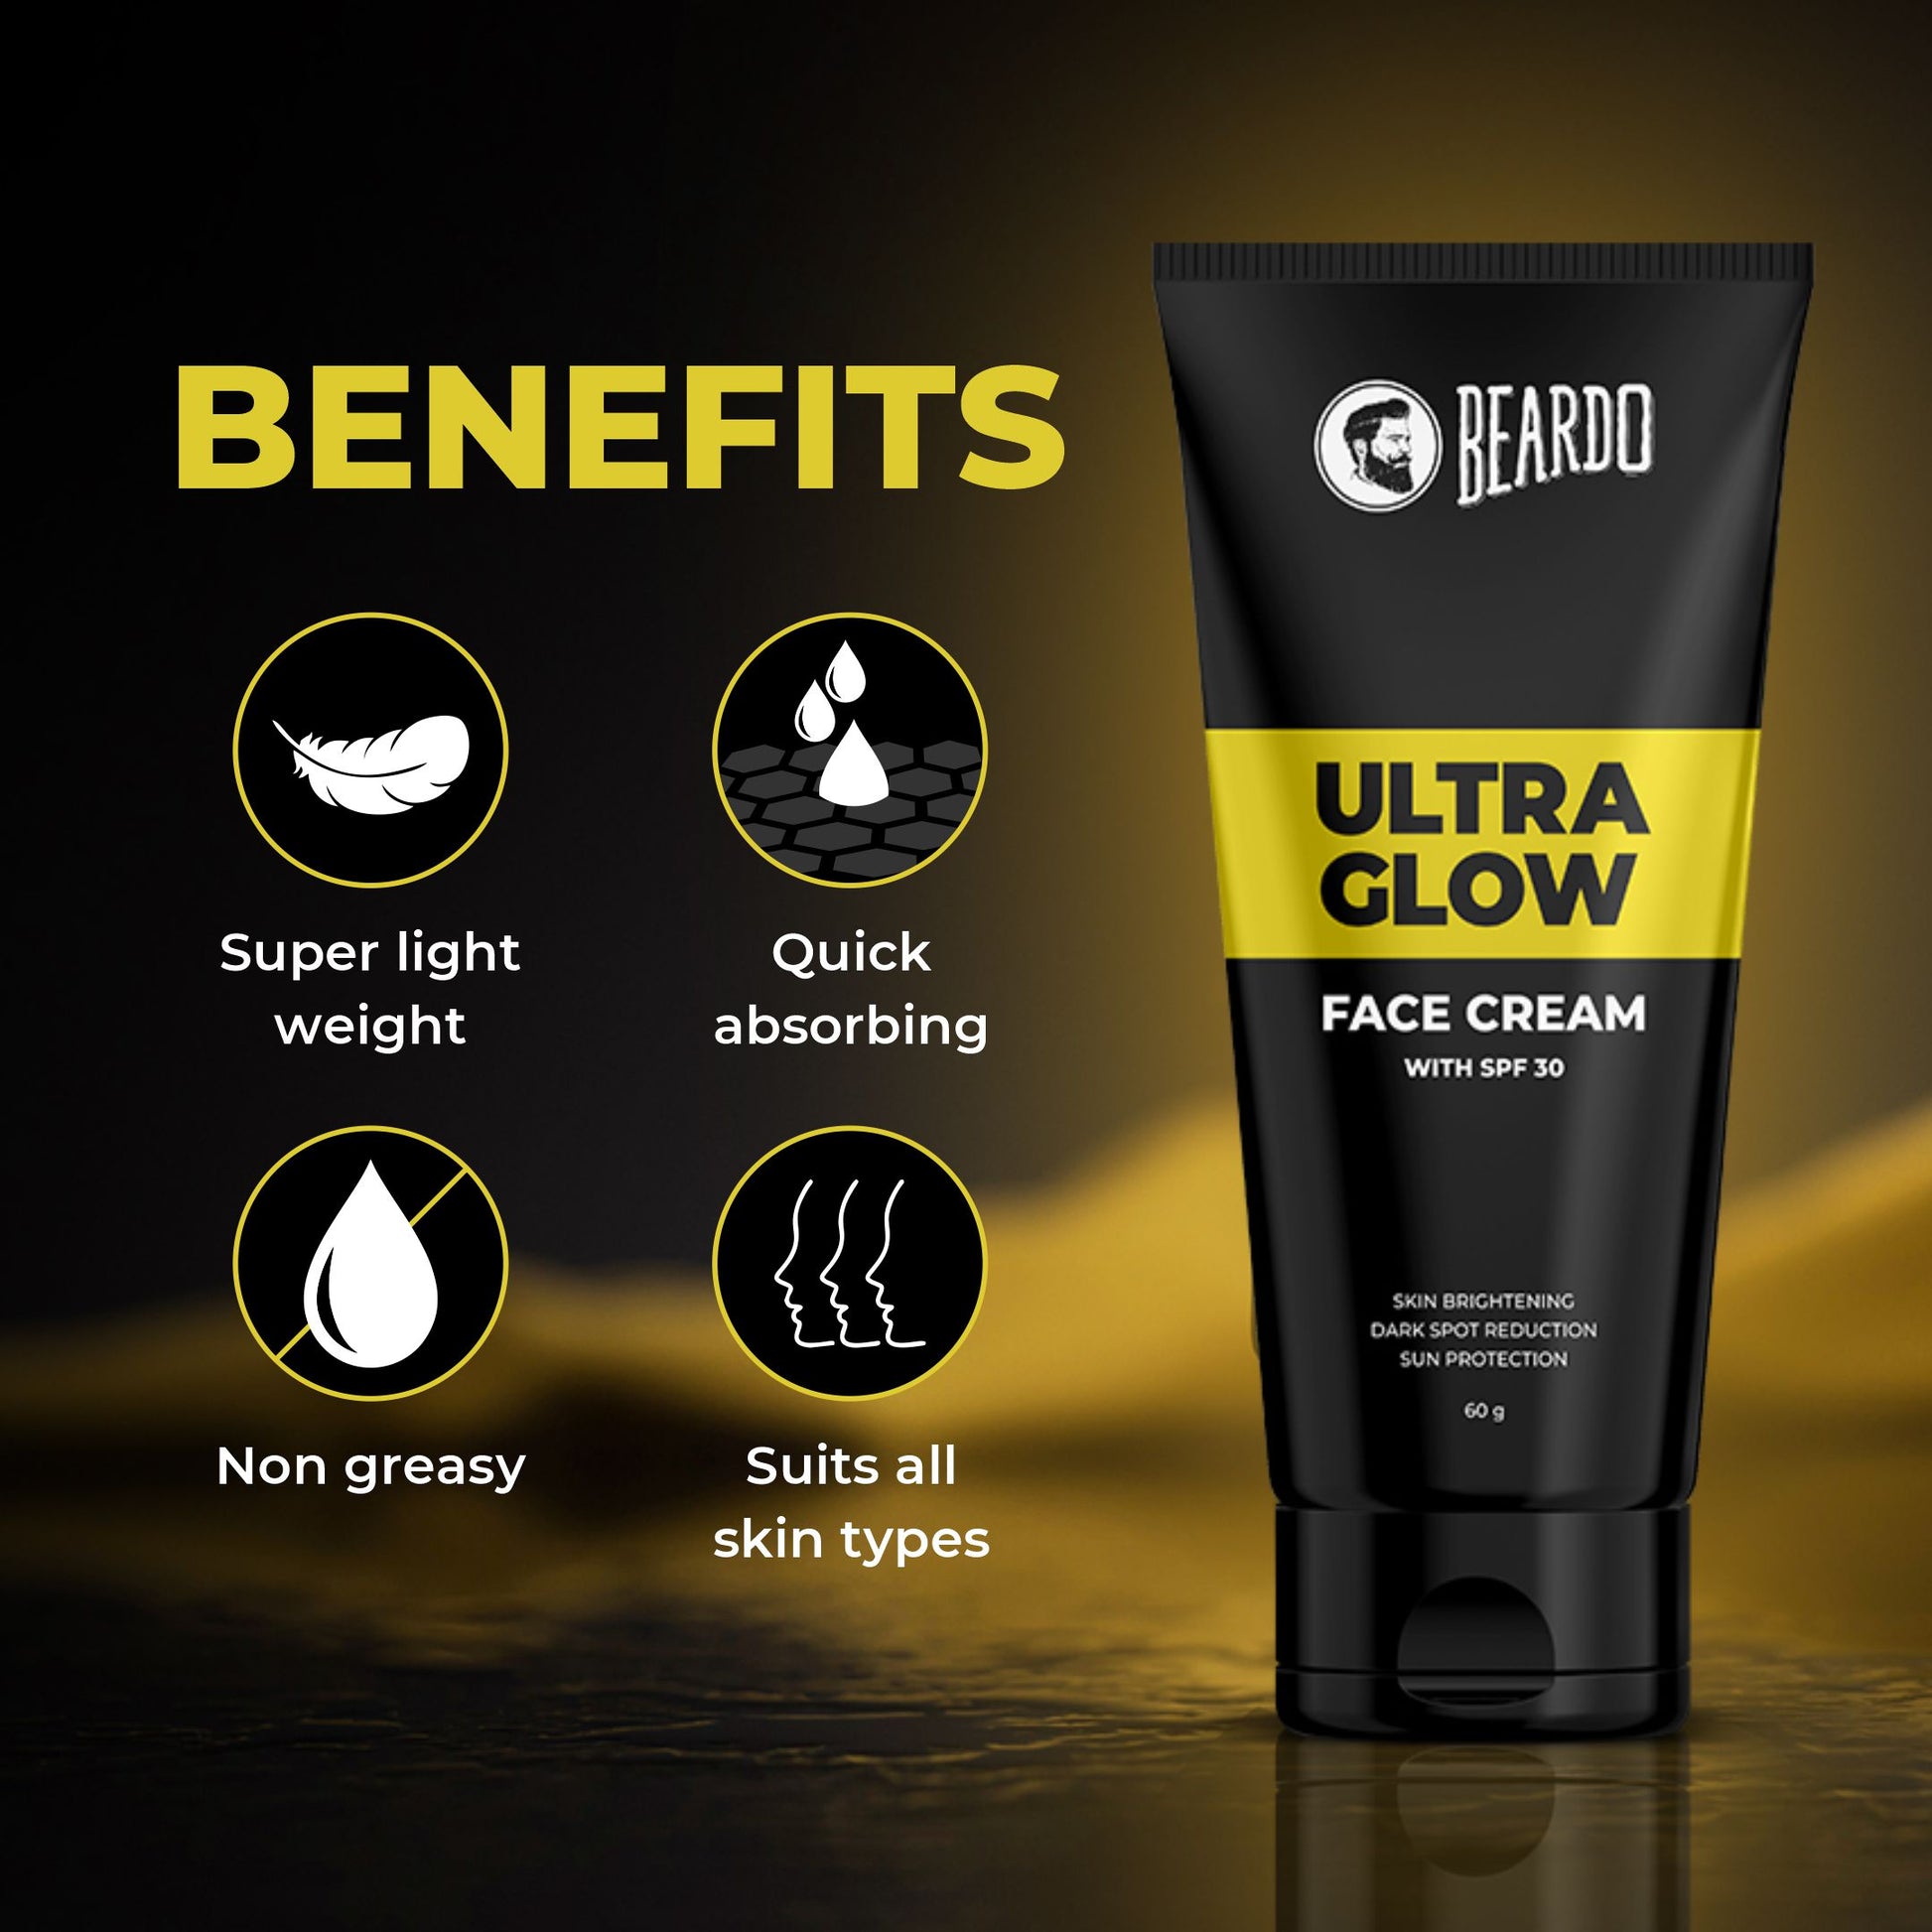 ultraglow face cream benefits, face cream for all skin types